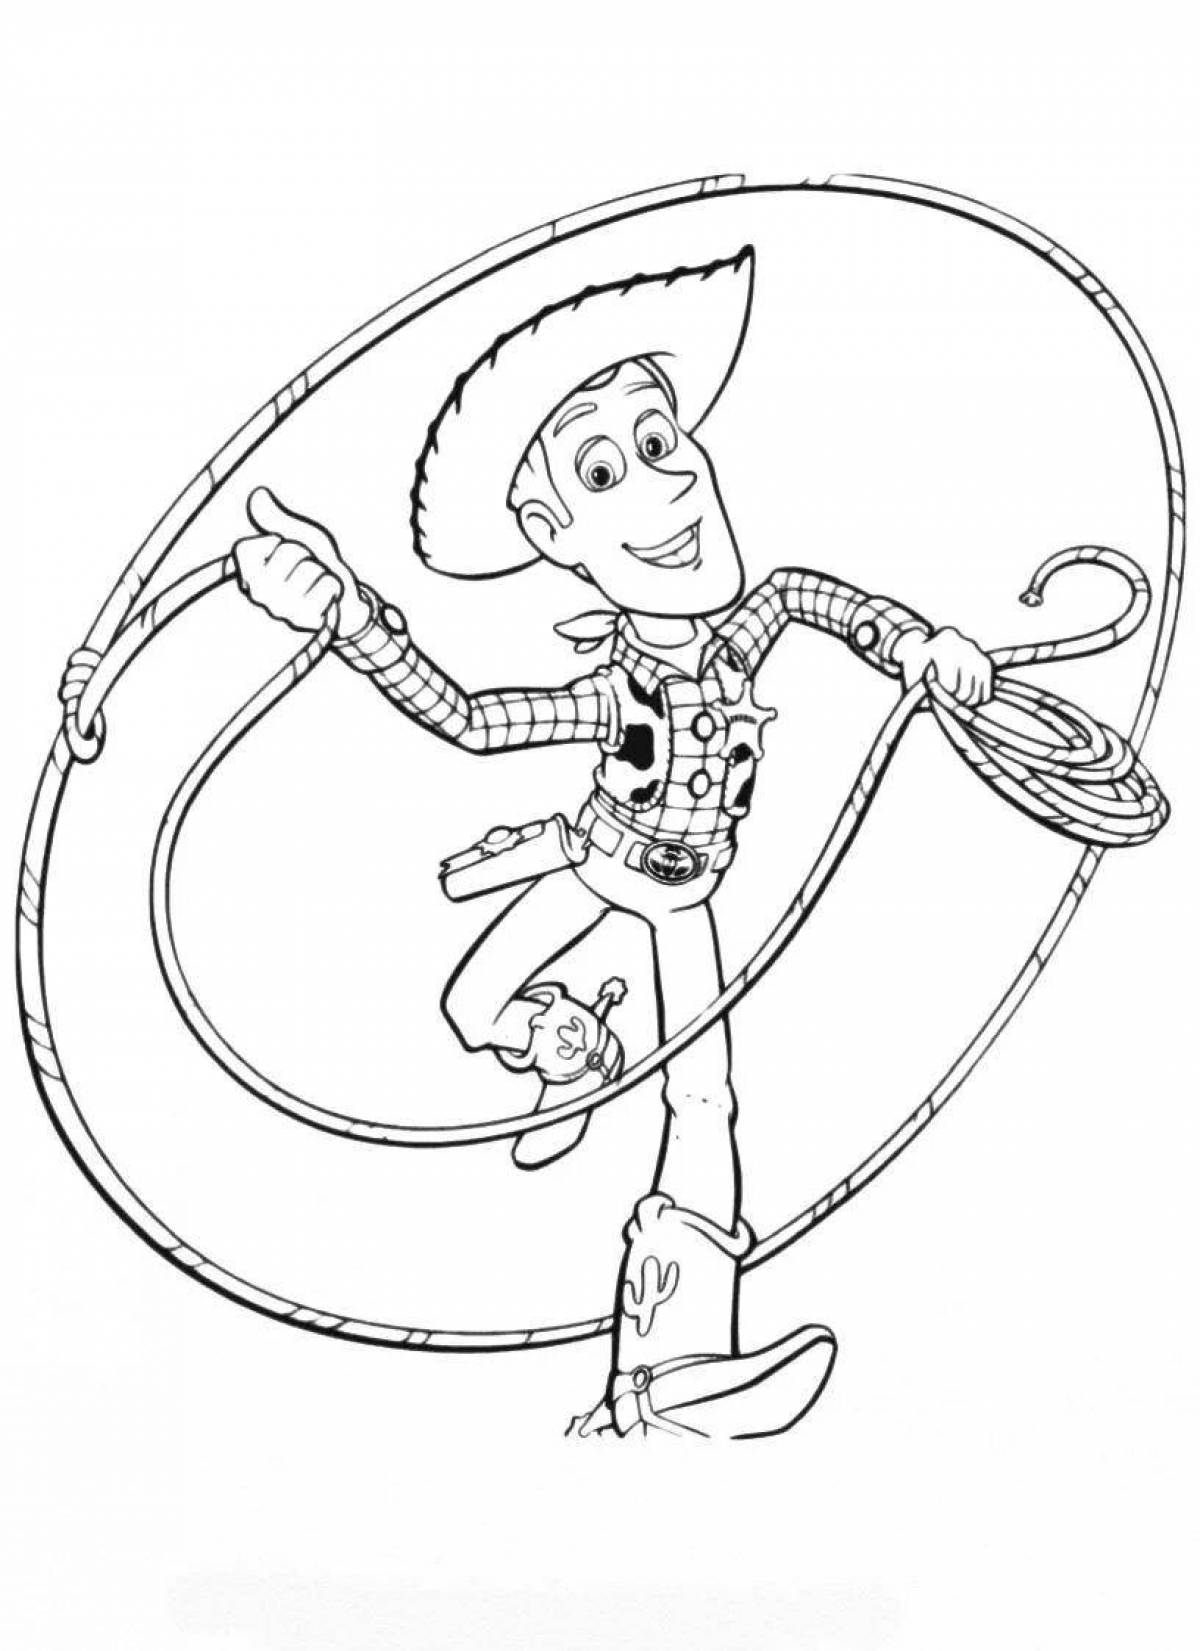 Jolly andy coloring page